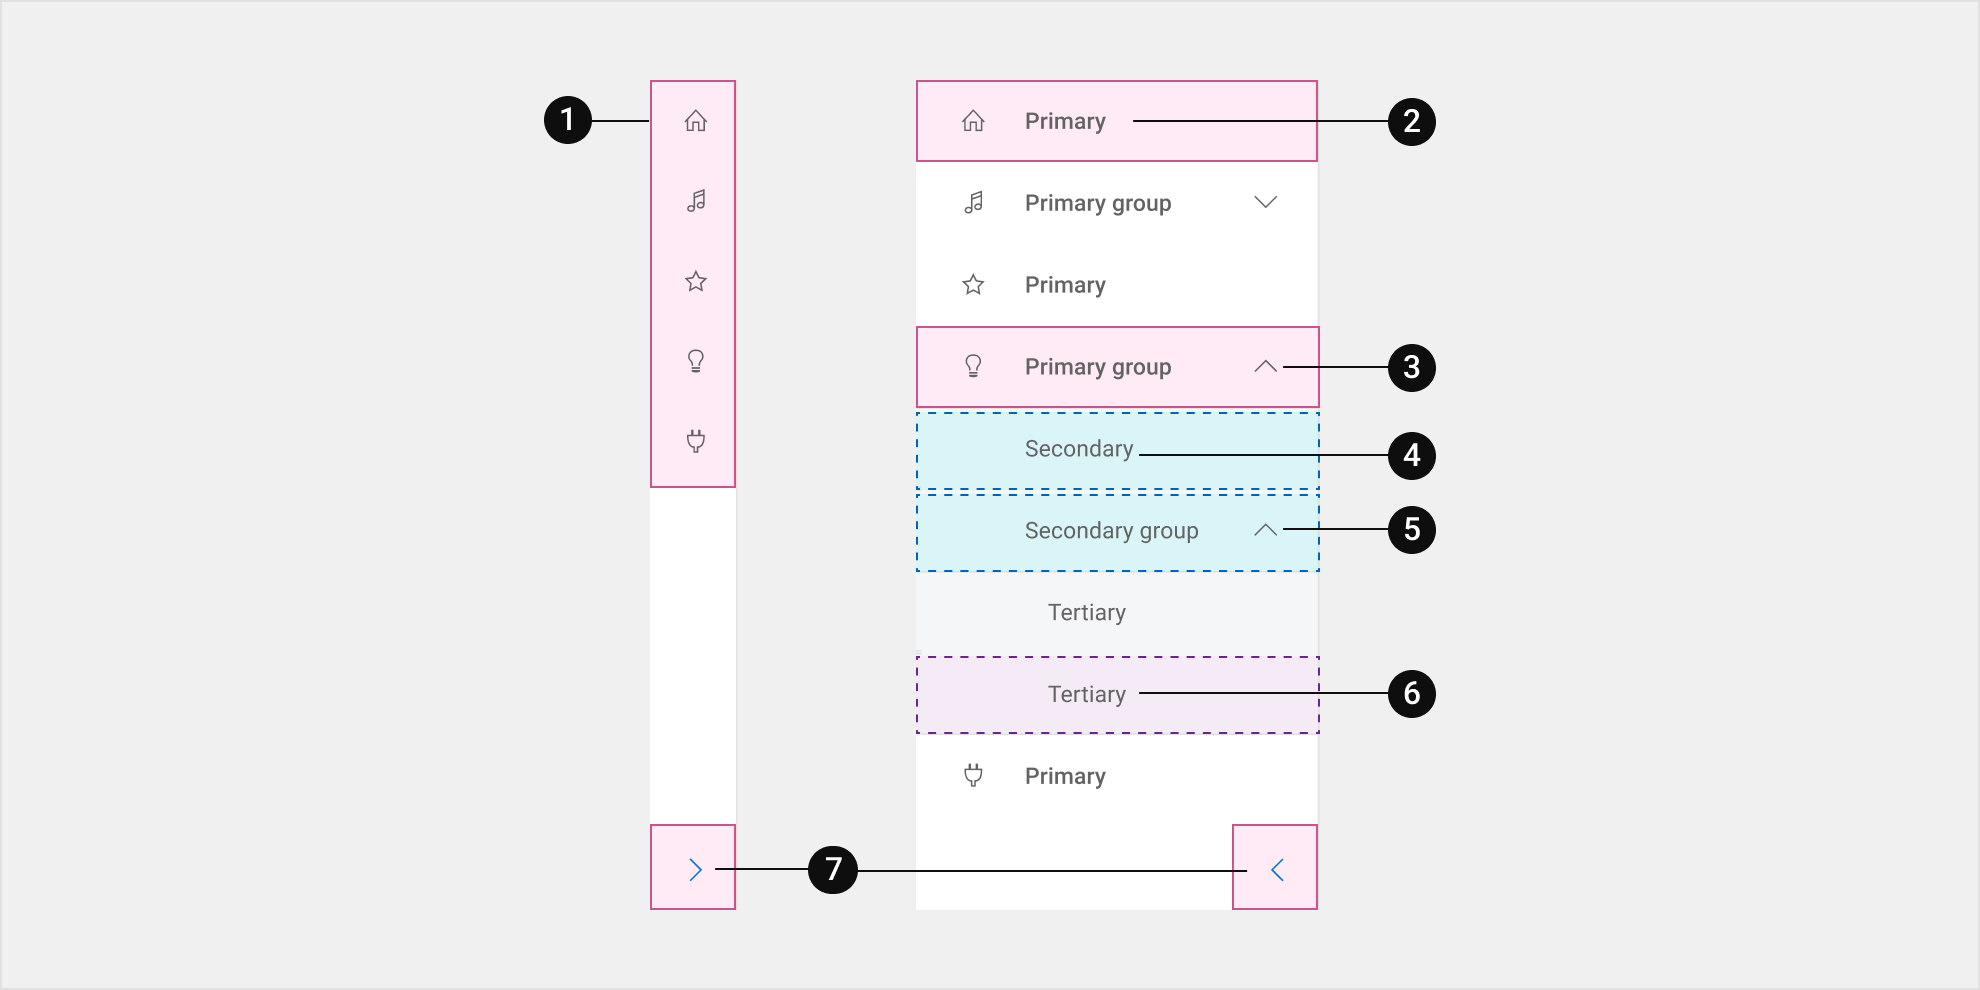 1. Navigation in the collapsible view, showing primary-page-level icons only.
2. Navigation in its expanded state, showing text with icon on primary levels.
3. Primary group in side navigation with secondary and tertiary navigation underneath.
4. Secondary pages under a primary group.
5. Secondary group with chevron indicating tertiary levels.
6. Tertiary page navigation under a secondary group.
7. Chevrons to collapse and expand navigation in the collapsible view. Chevrons do not appear in fixed view.